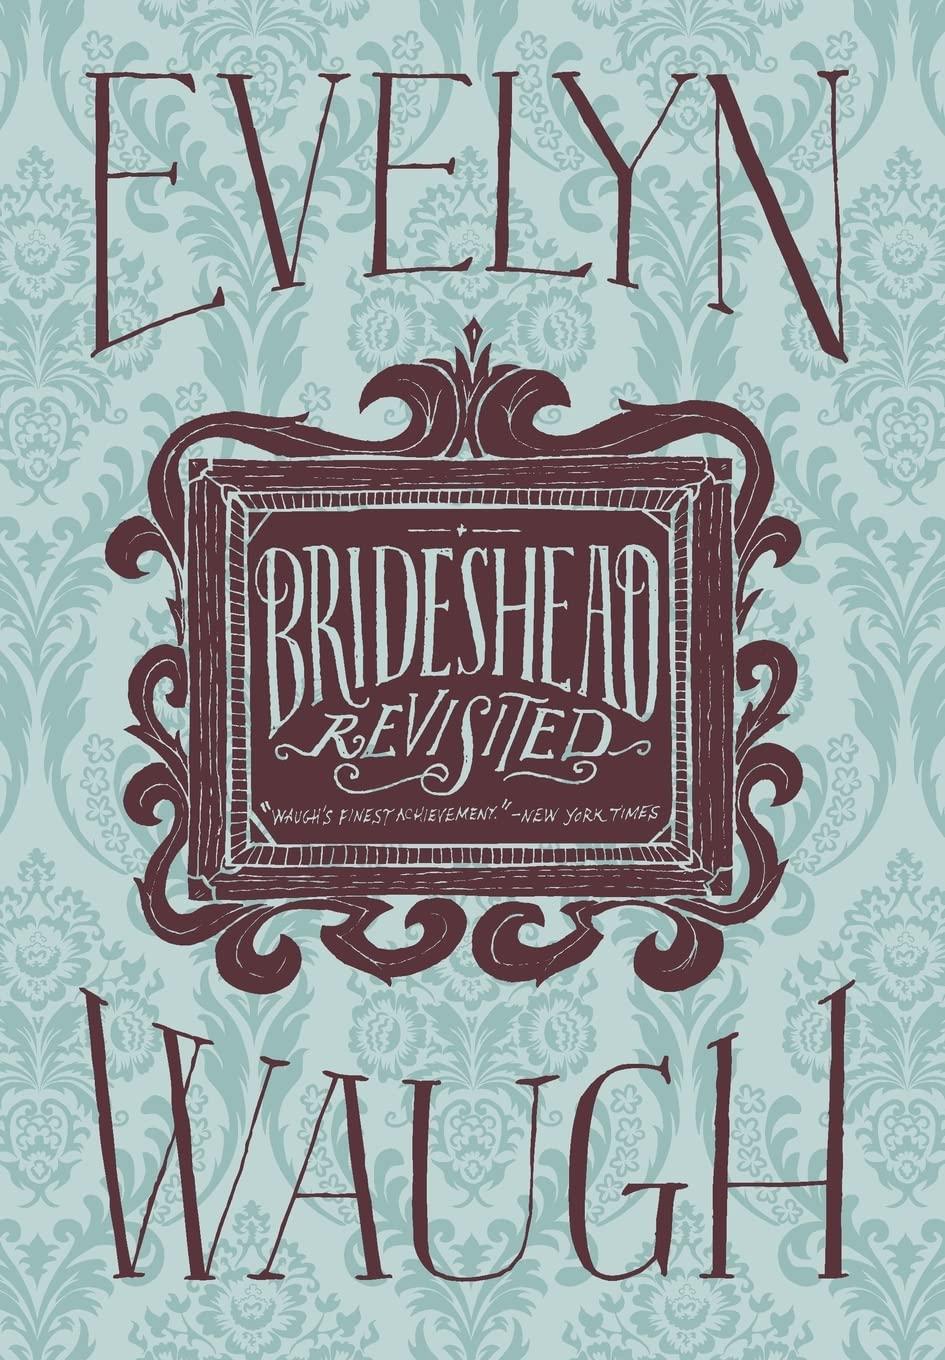 "Brideshead Revisited," by Evelyn Waugh.